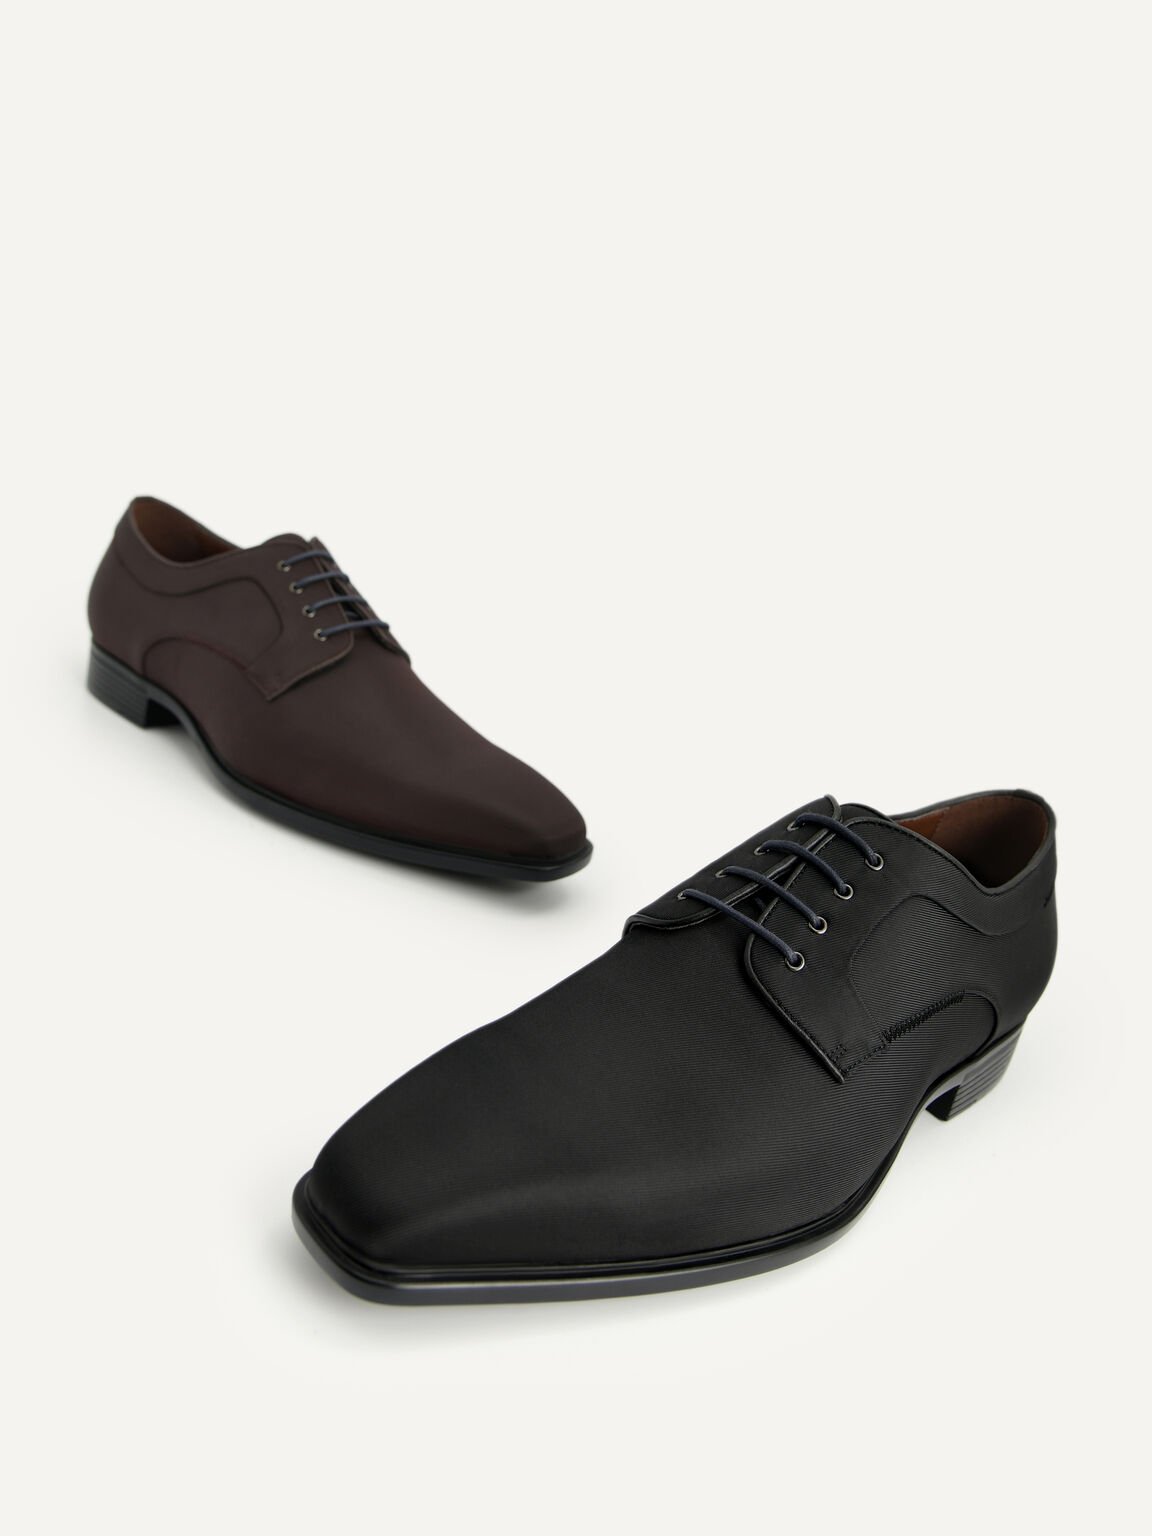 Pointed Square Toe Derby Shoes, Black